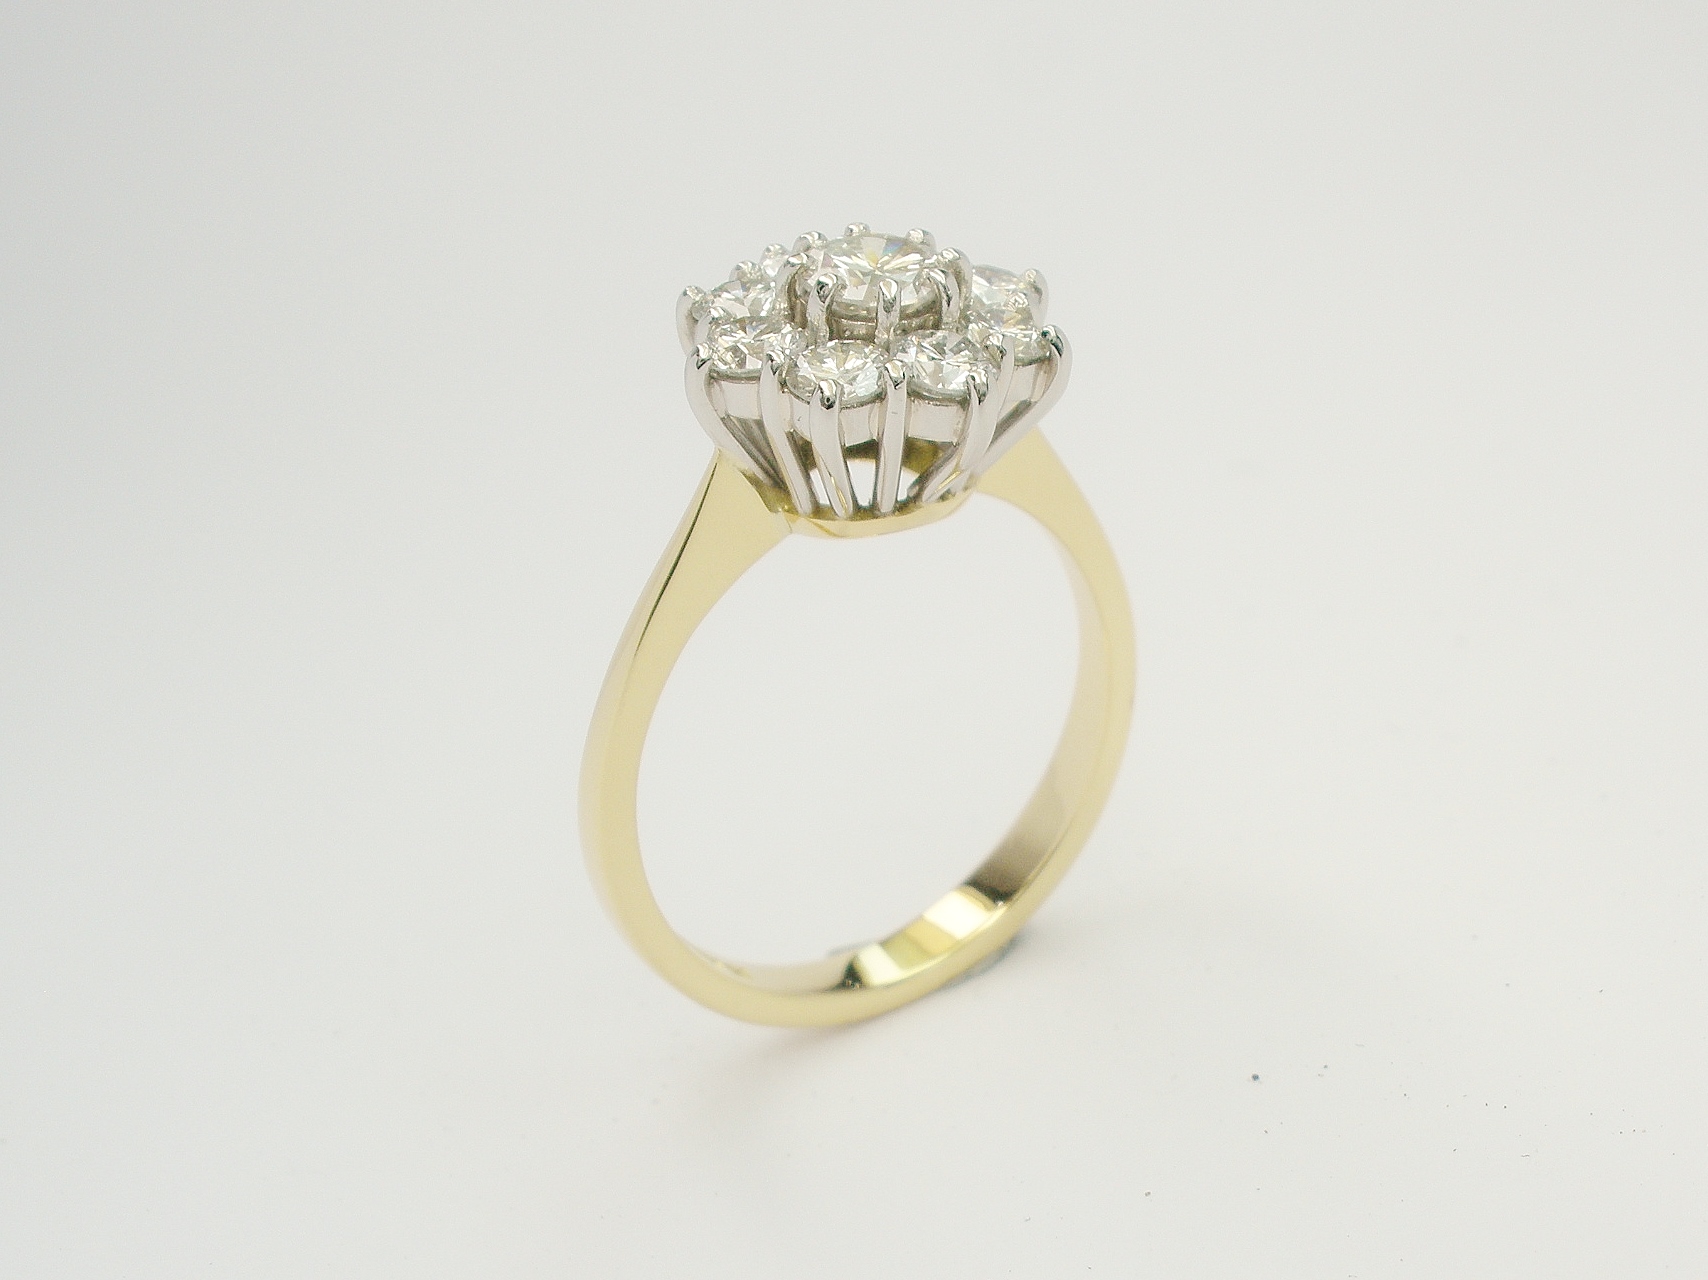 My remodel of 9 stone round brilliant cut diamond cluster in 18ct. yellow gold & platinum.